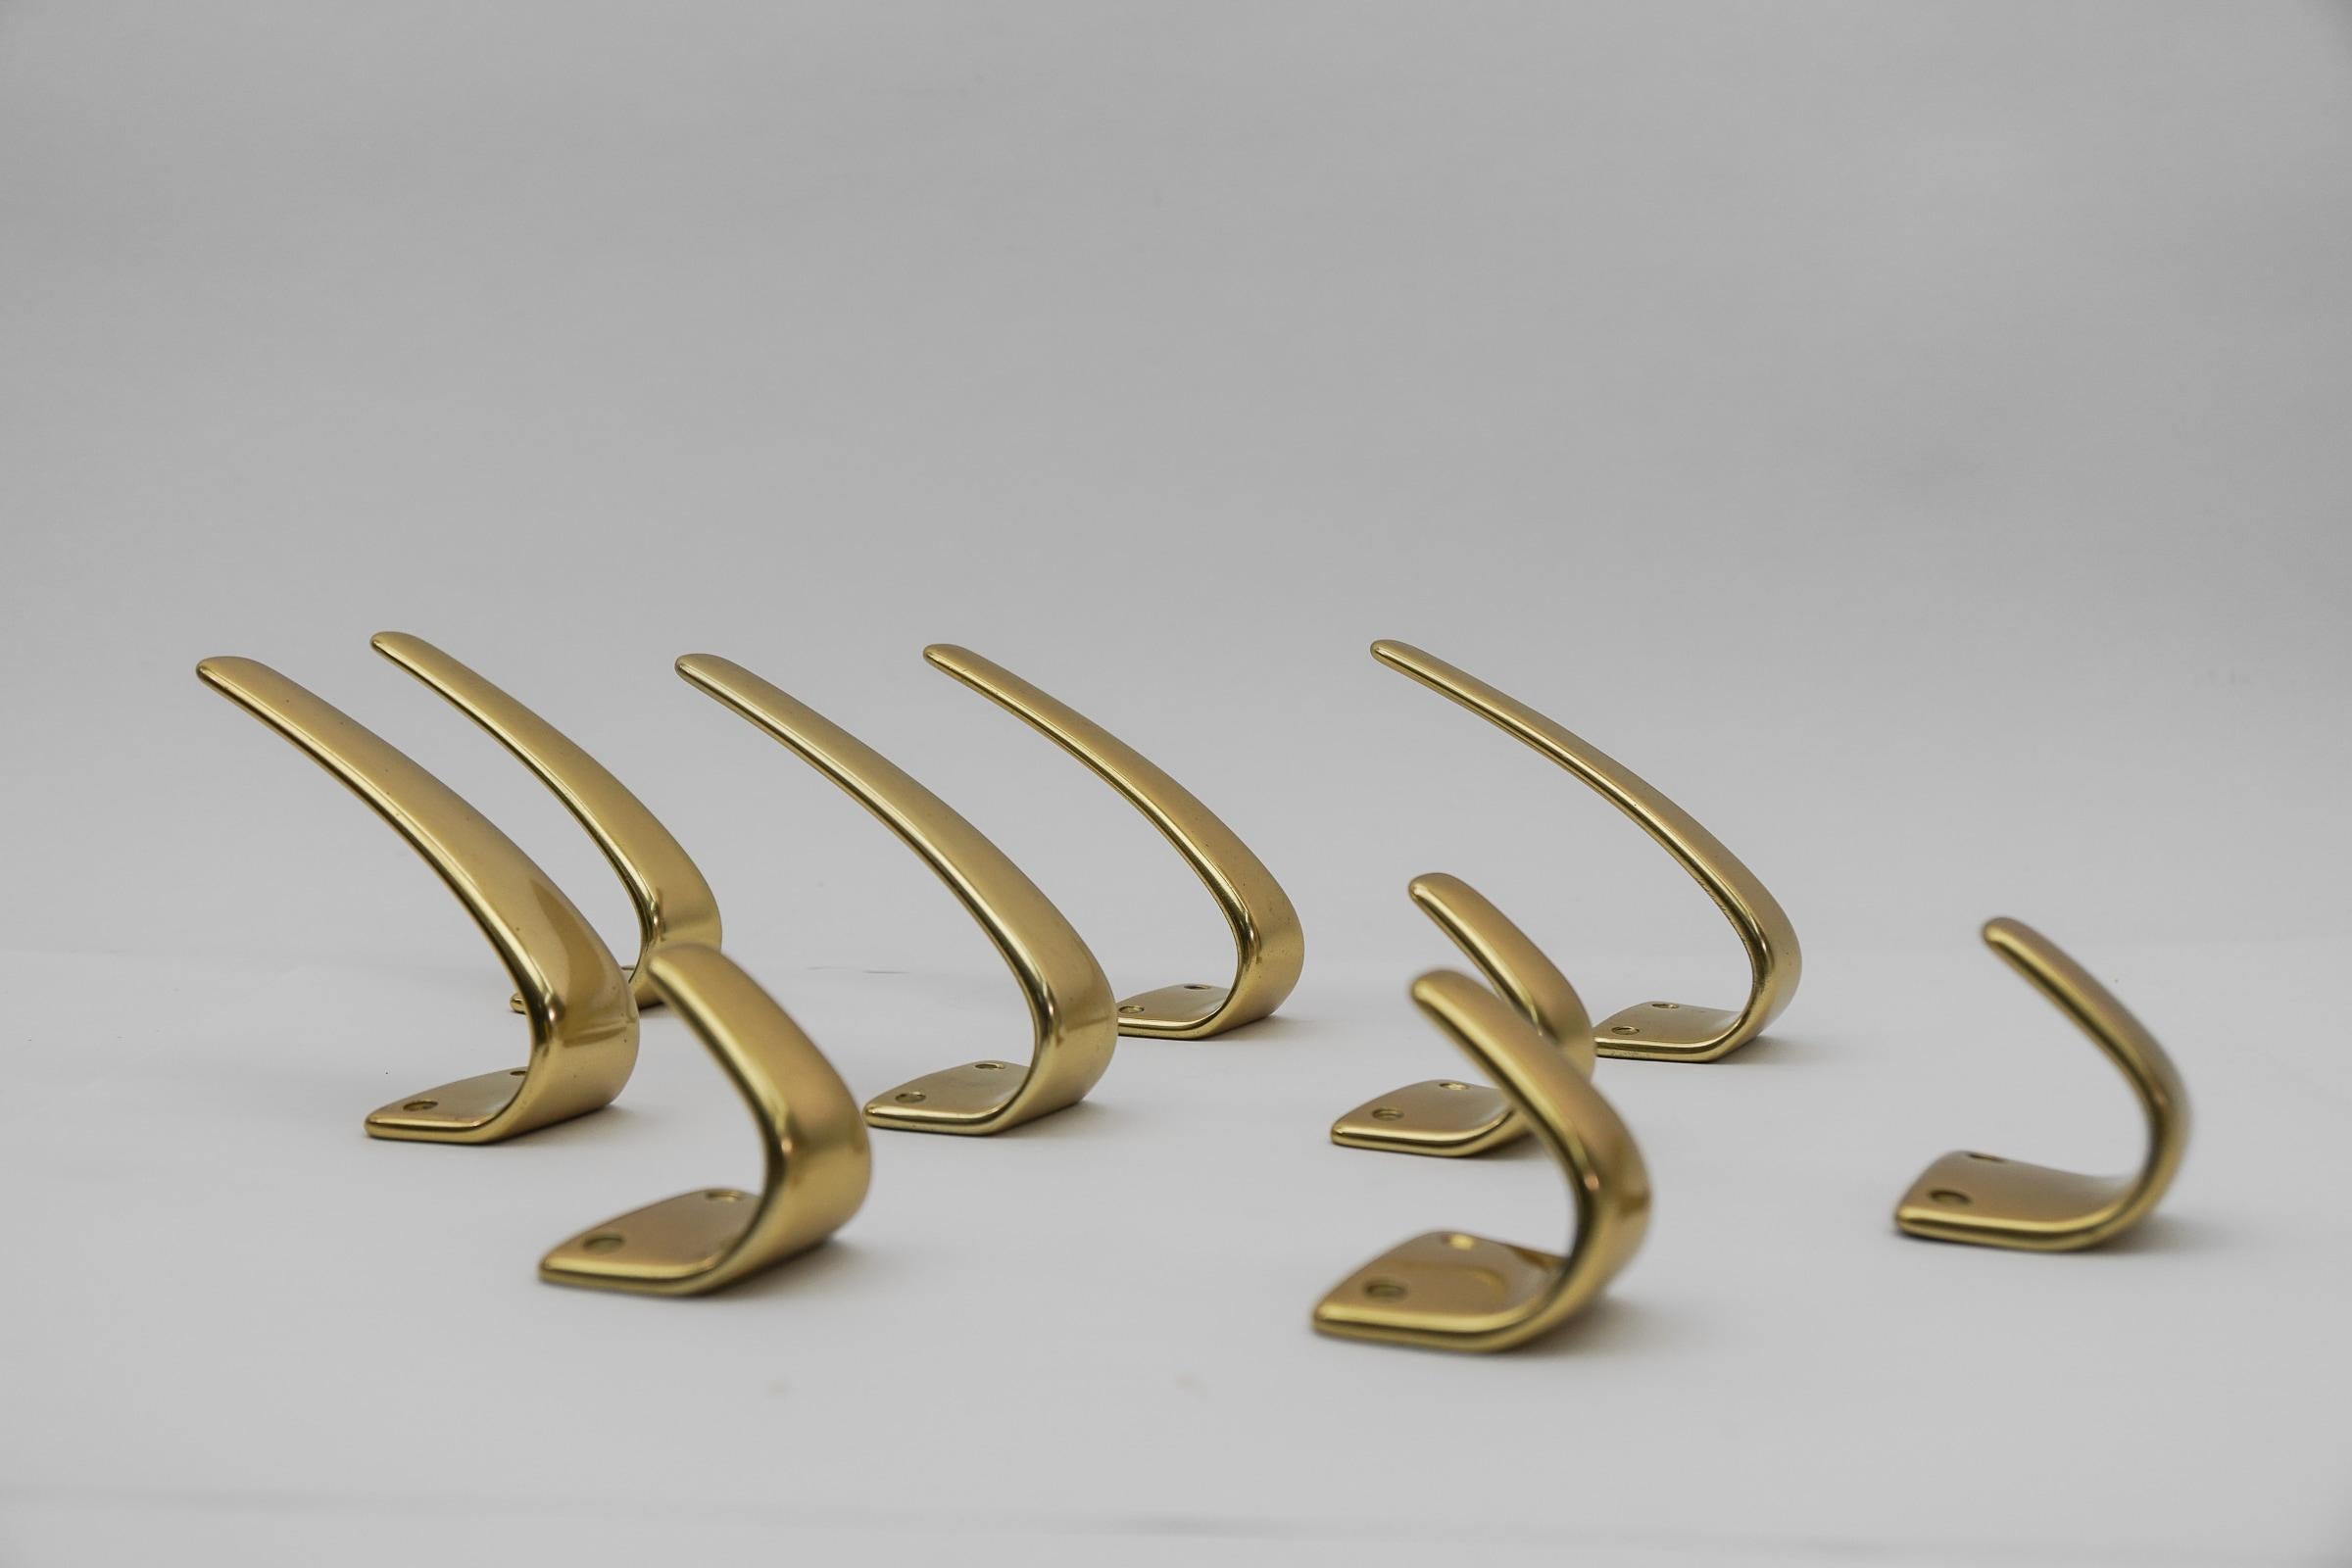 Set of 18 Midcentury Brass Wall Hooks, Austria, 1950s For Sale 1